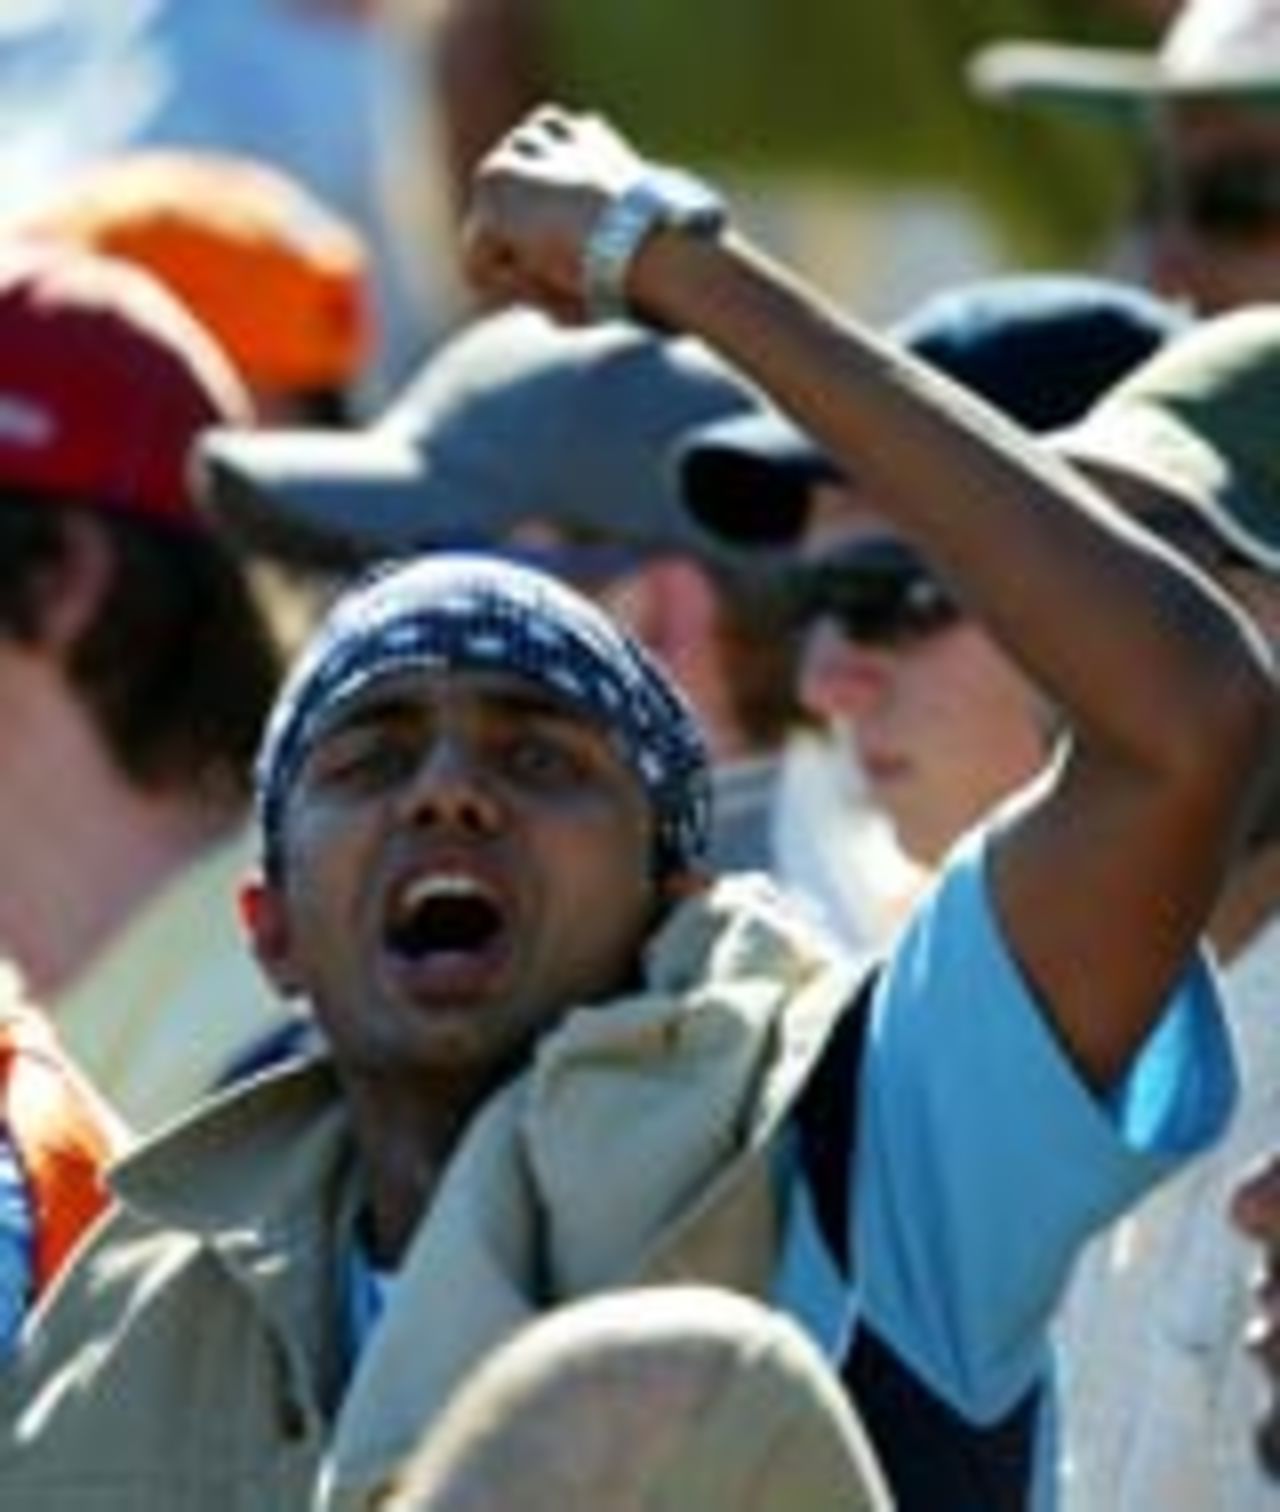 An Indian fan celebrates wildly, Australia v India, 2nd Test, Adelaide, 3rd day, December 14, 2003